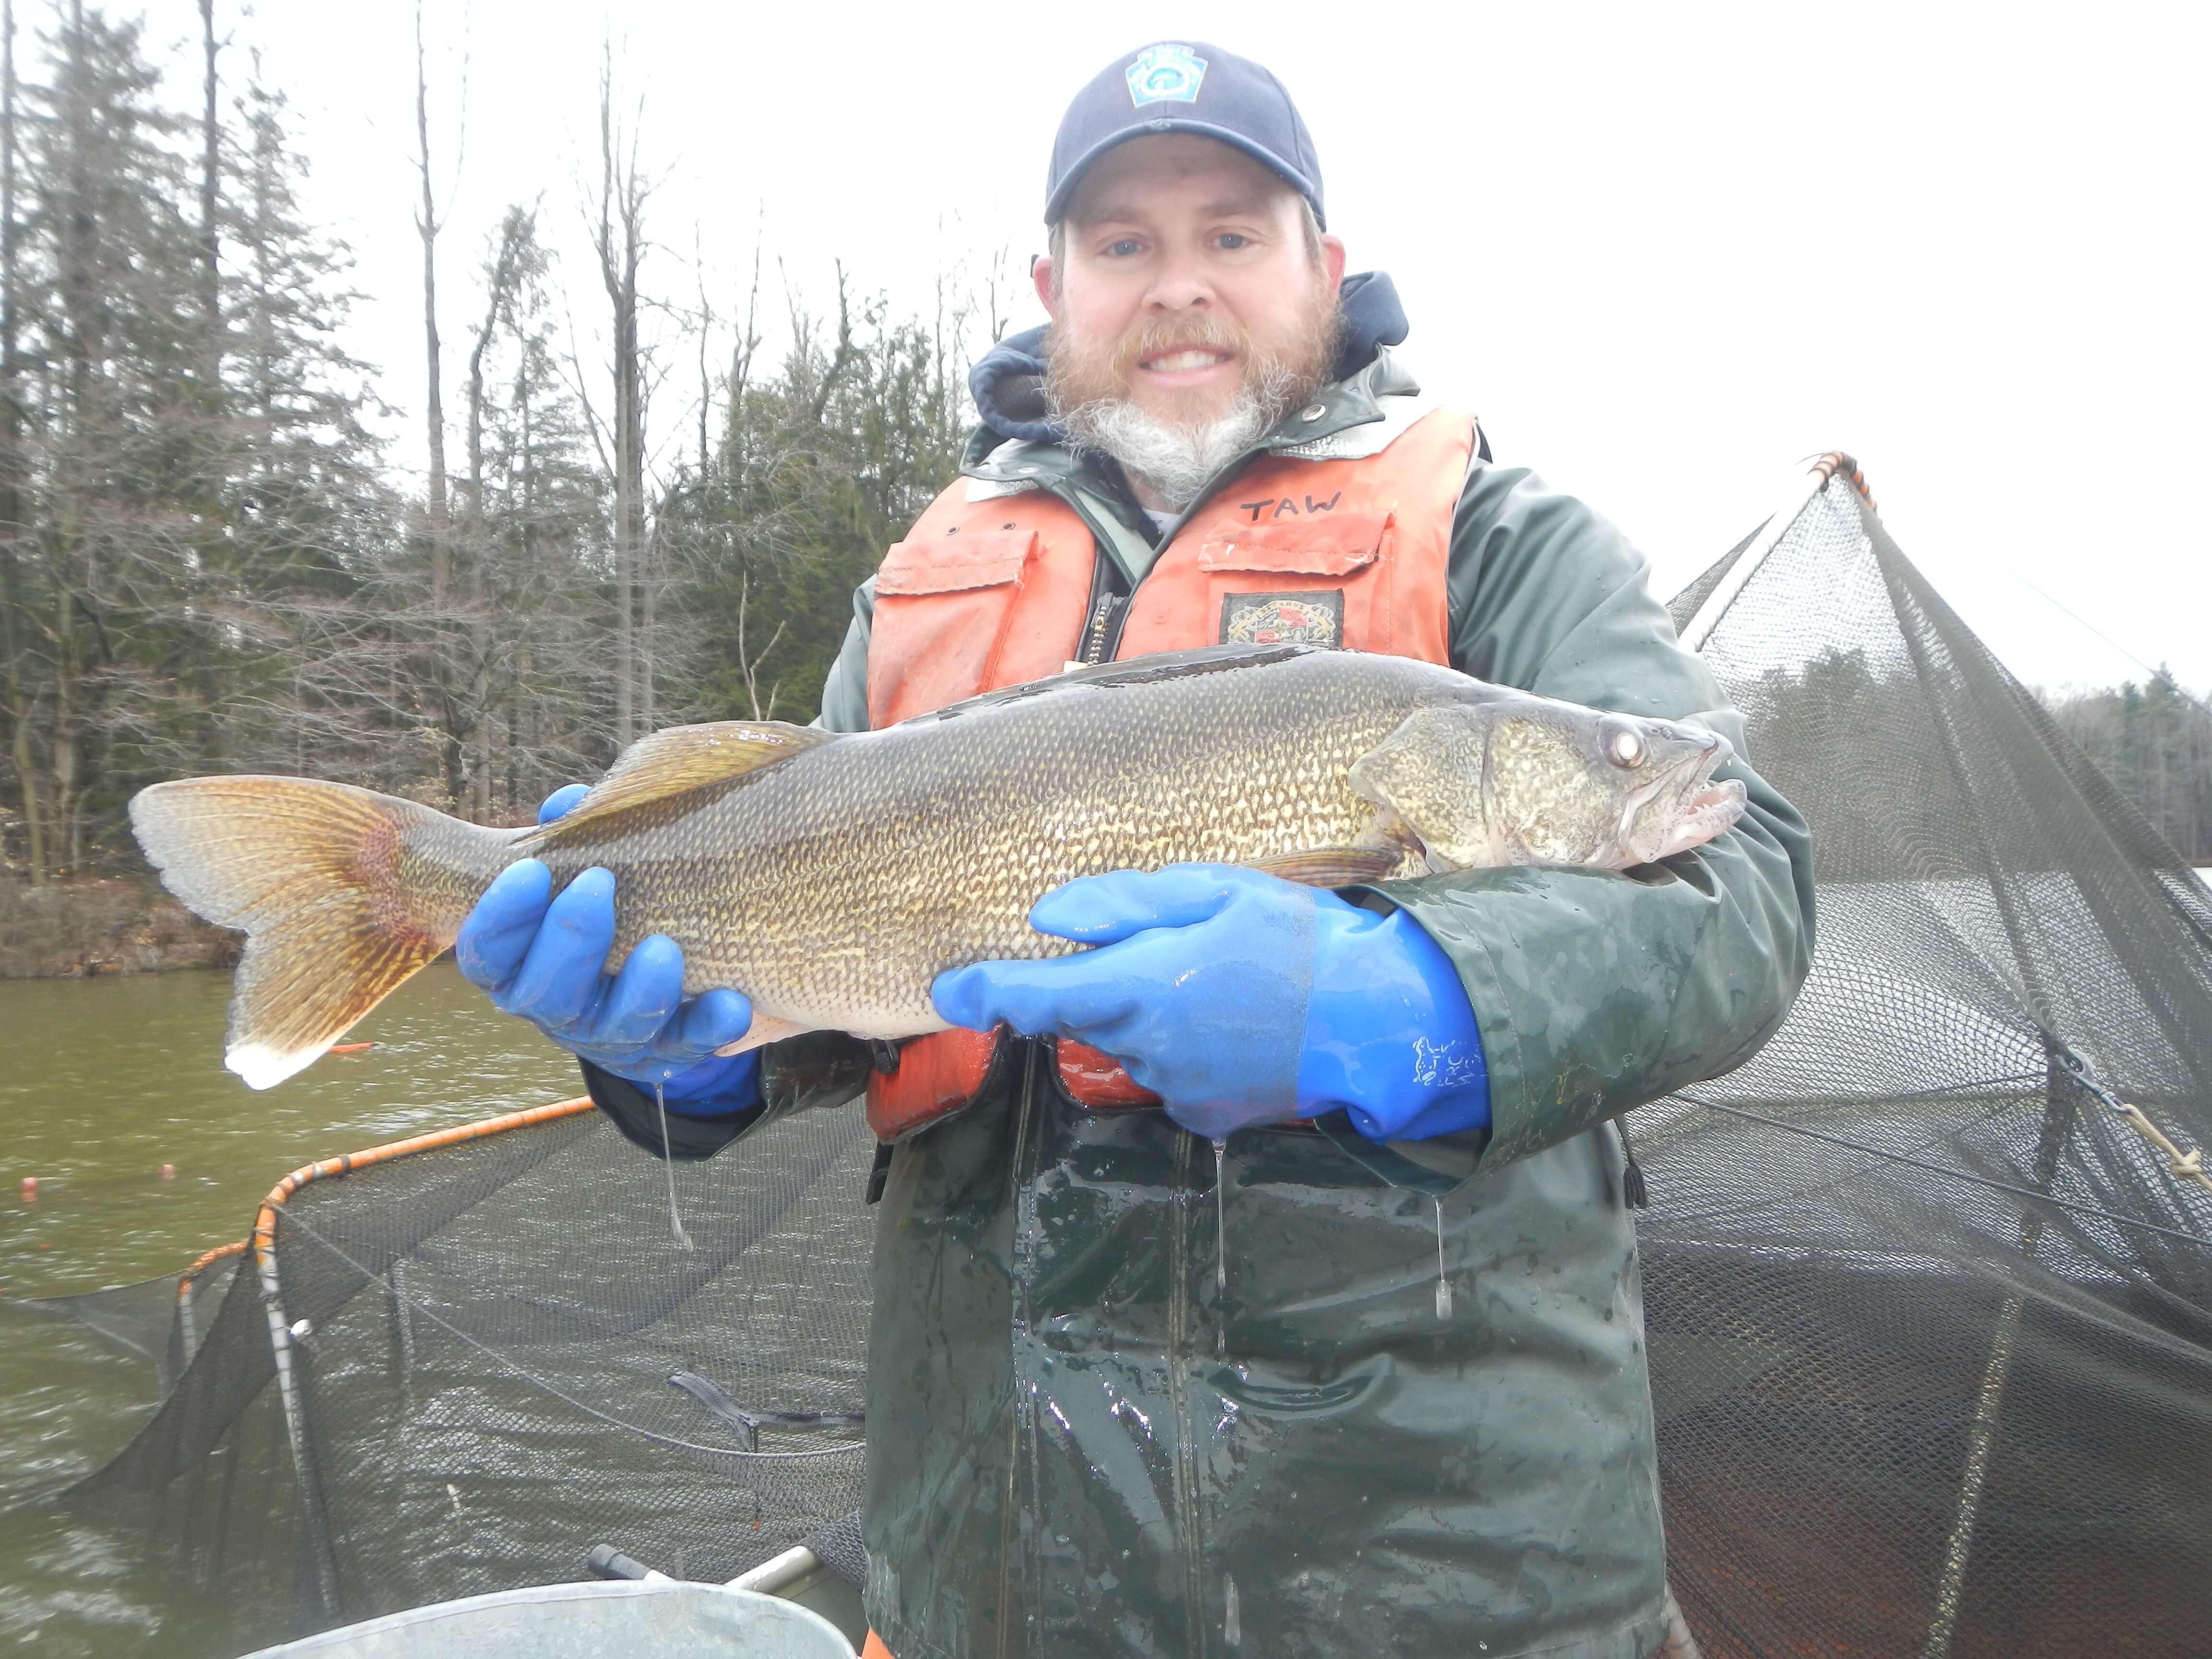 Pymatuning Lake Is Home To Loads Of Walleyes And Has Been For Years